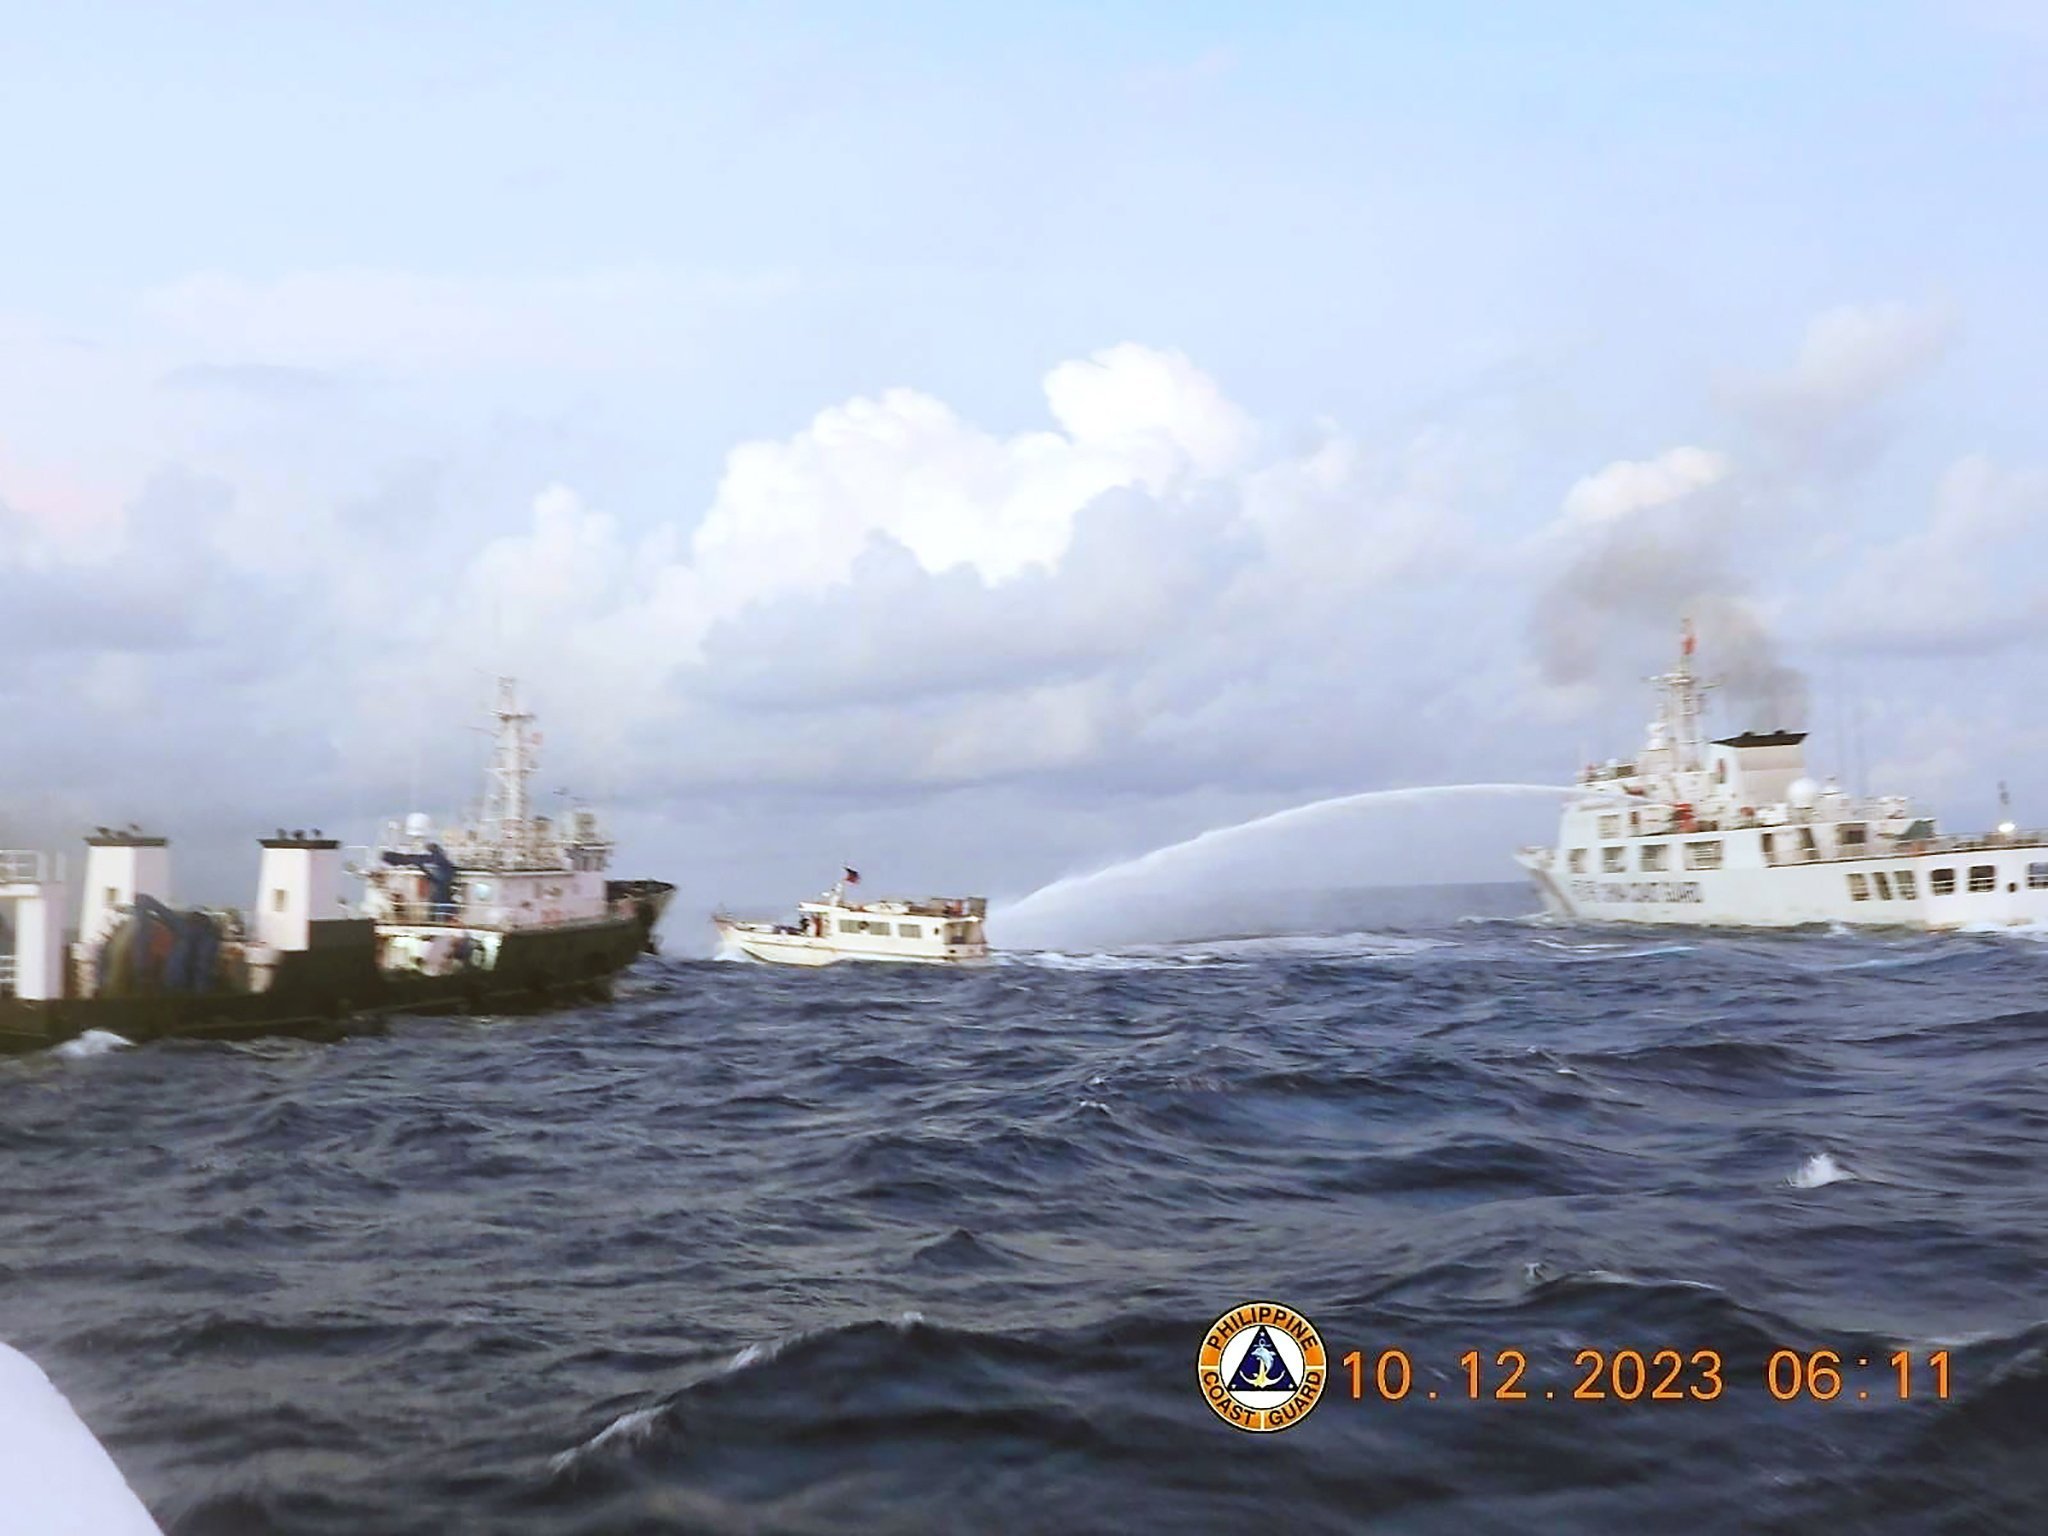 A Chinese coastguard ship (right) fires a water cannon on a supply boat operated by the Philippine Navy on Sunday in this handout photo made available by the Philippine coastguard. Photo: Philippine Coast Guard / Handout via EPA-EFE